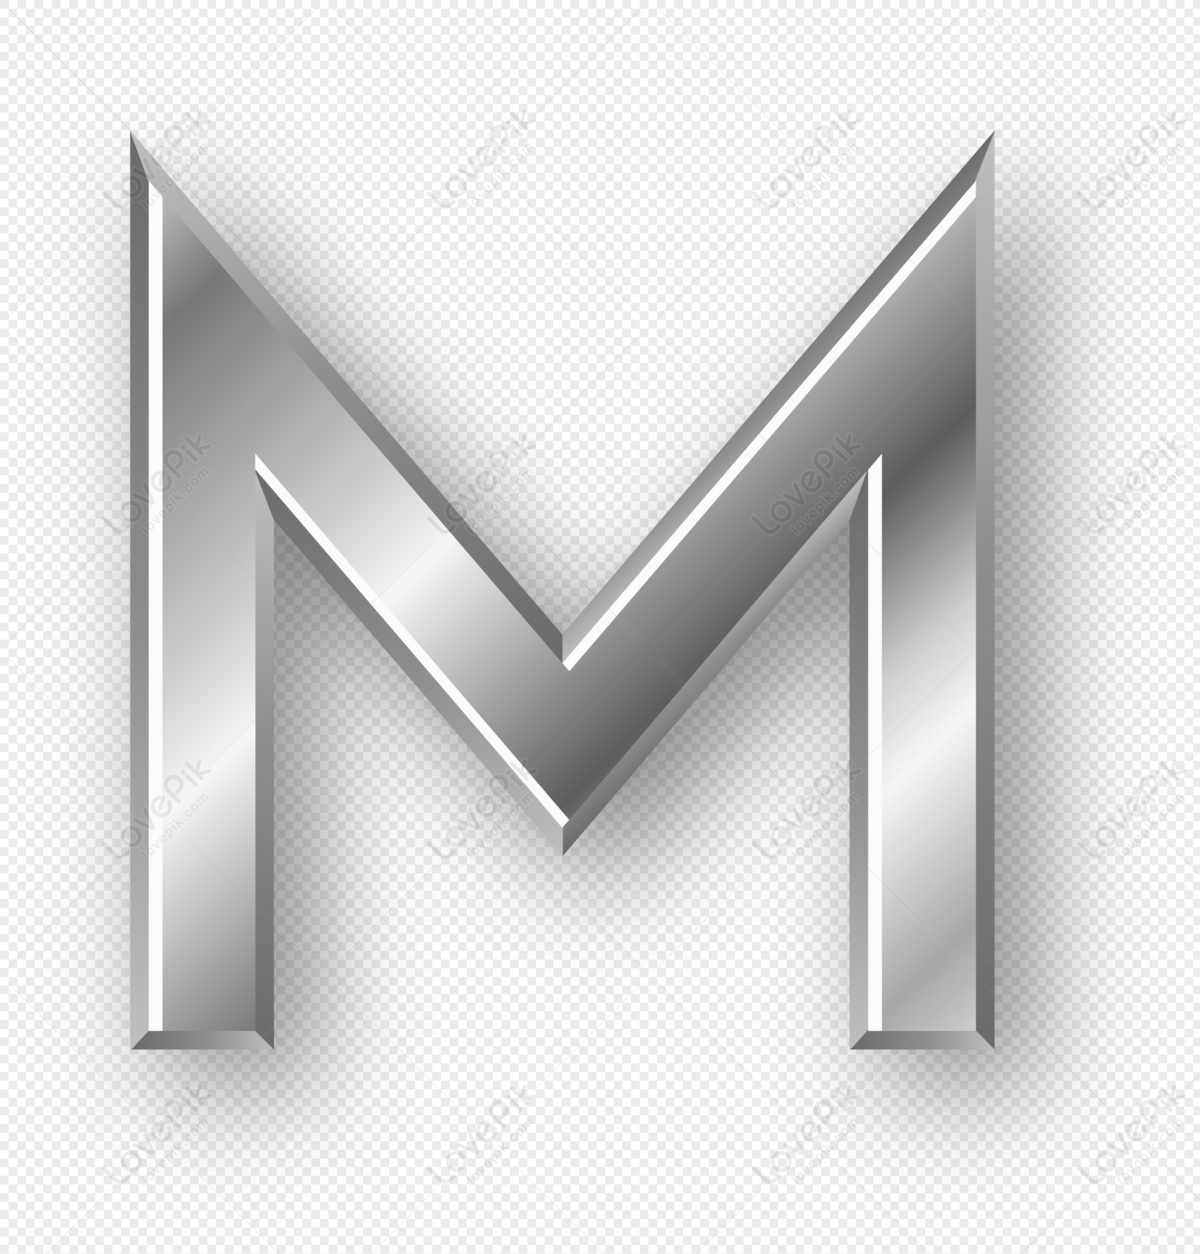 Stereo Letter M PNG Transparent Background And Clipart Image For ...